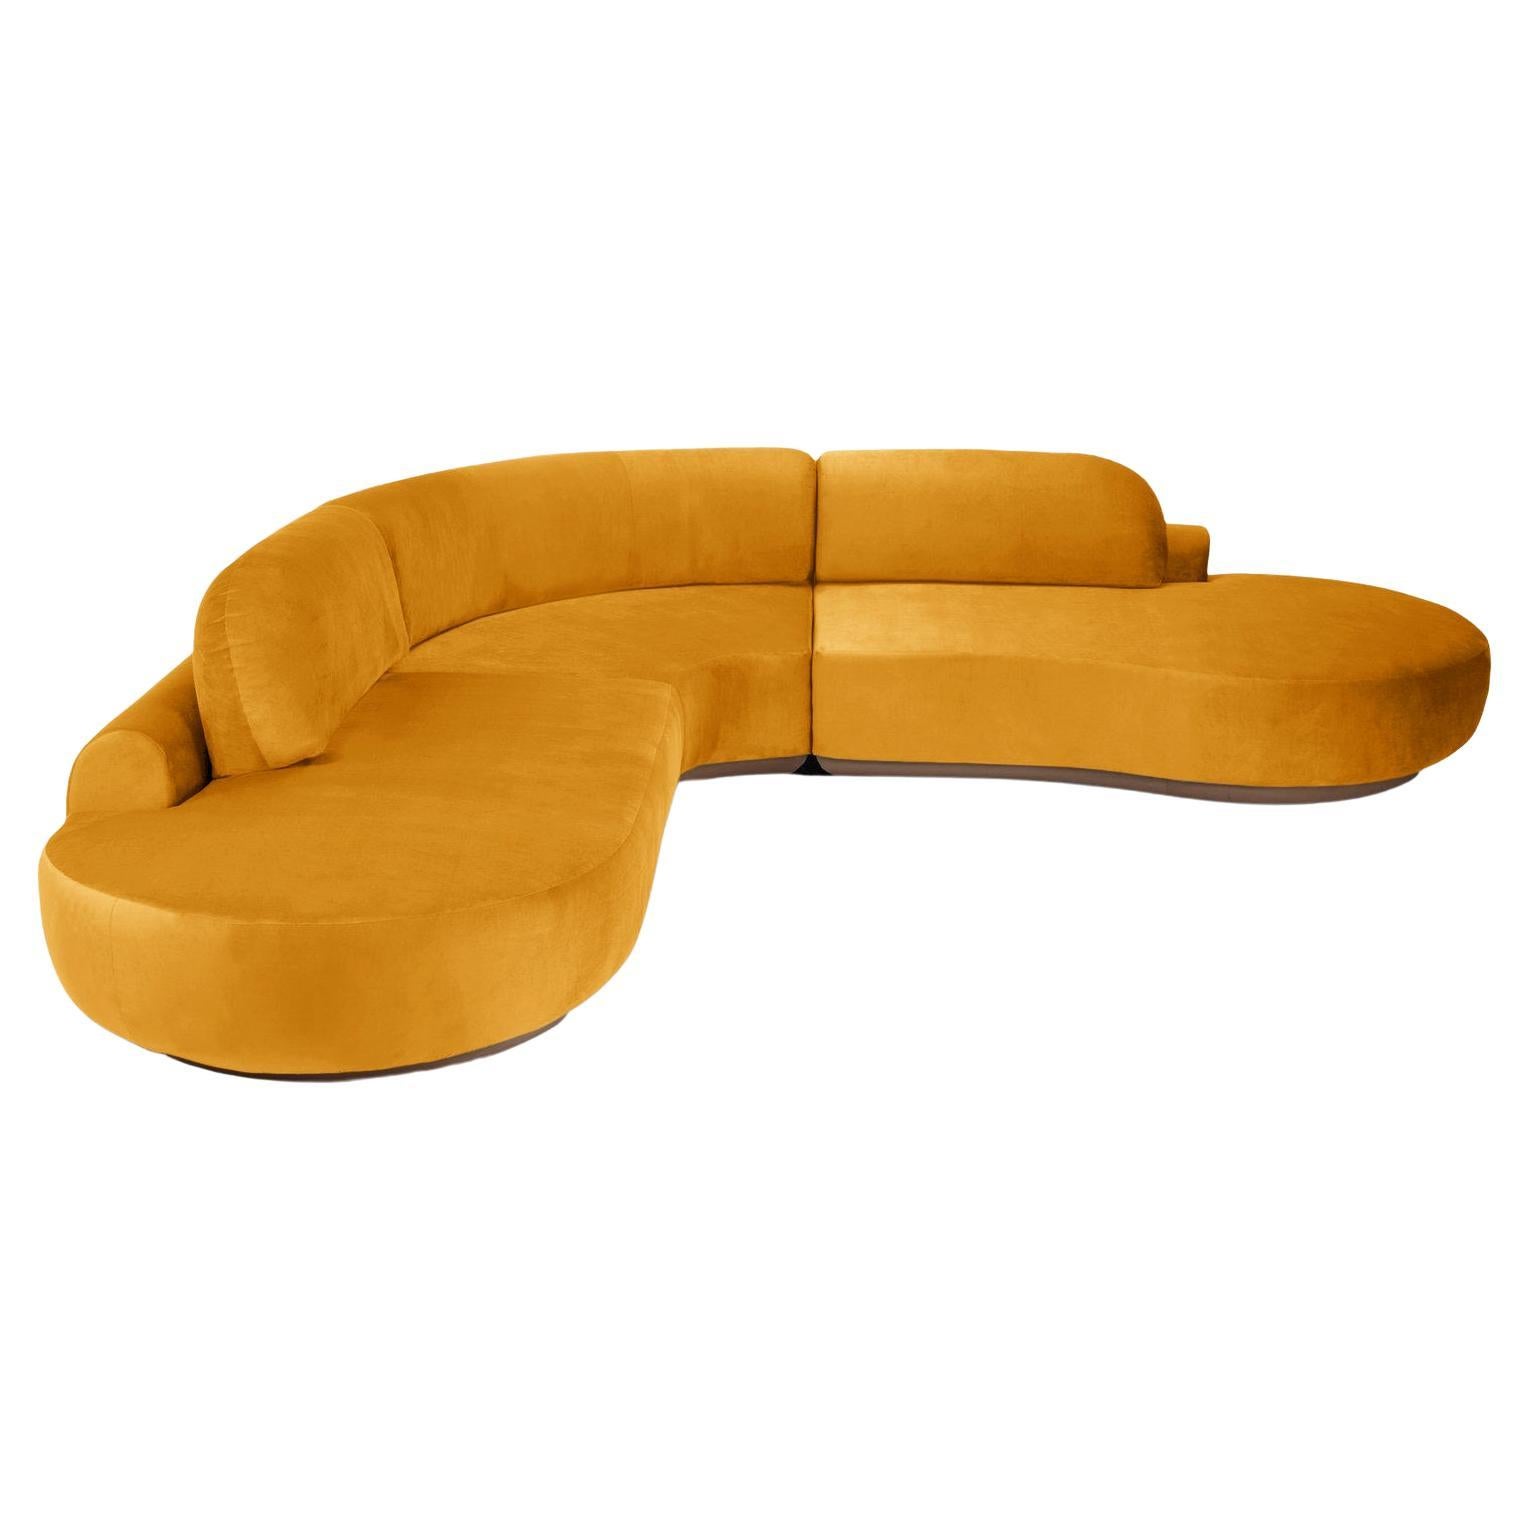 Naked Curved Sectional Sofa, 3 Piece with Beech Ash-056-1 and Corn